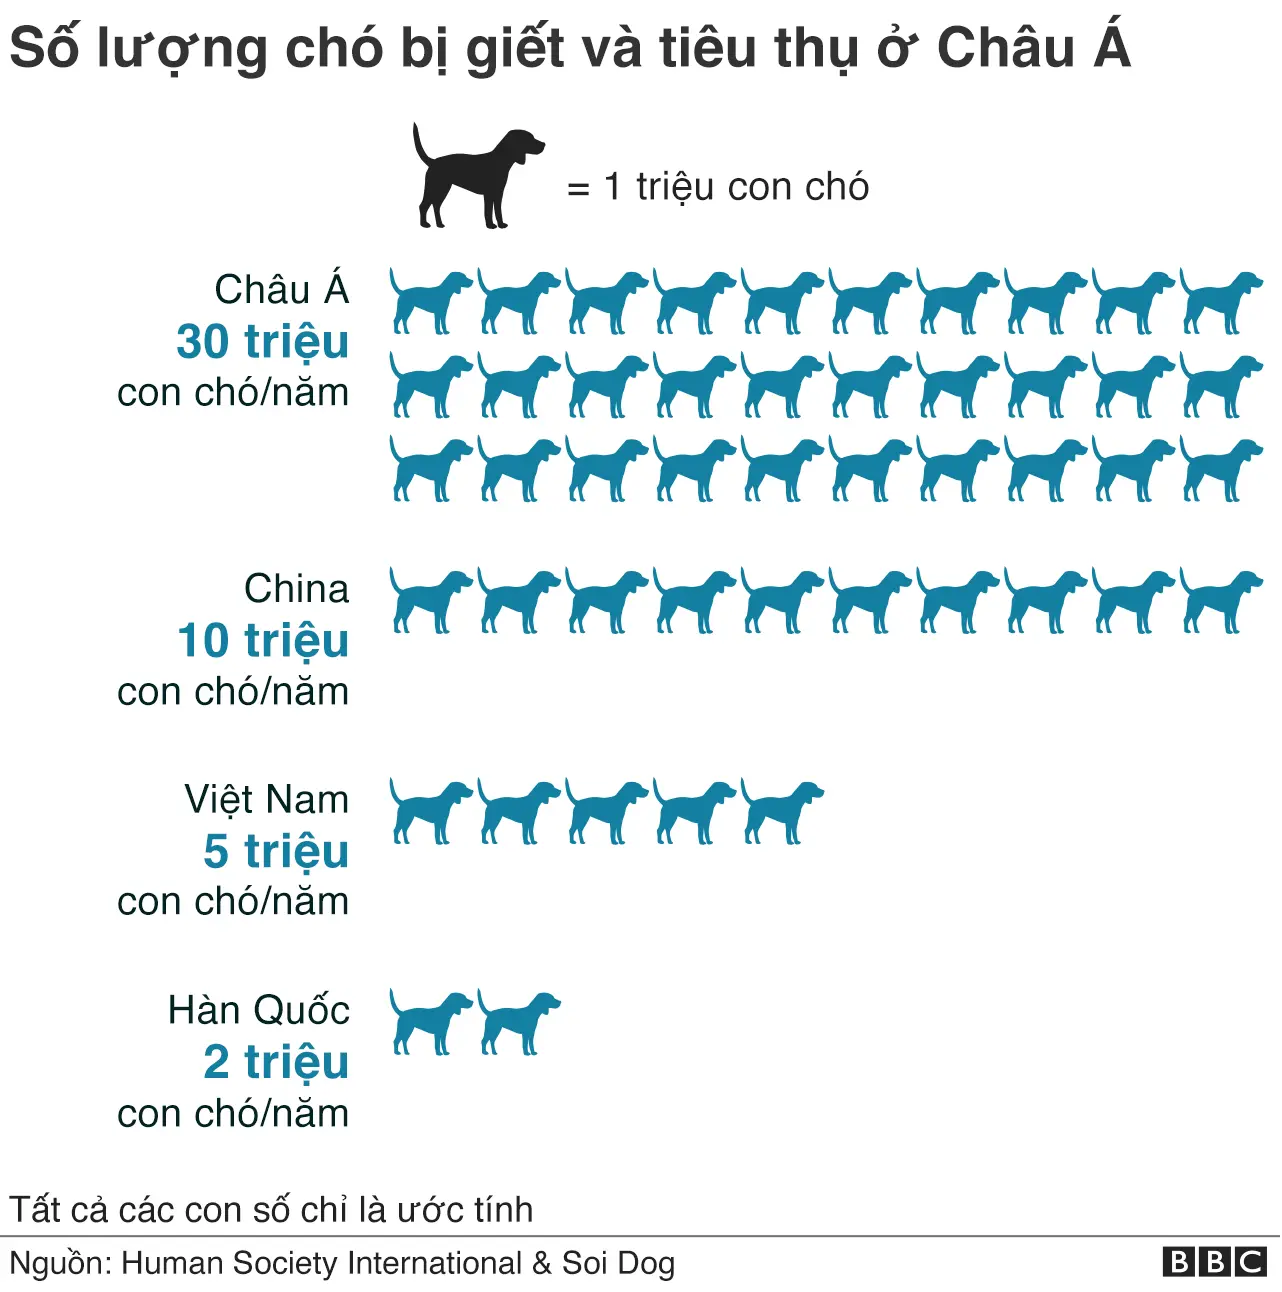 https://ichef.bbci.co.uk/news/800/cpsprodpb/171EA/production/_121489649_asia_dog_meat_consumption__640-nc-2x-nc.png.webp